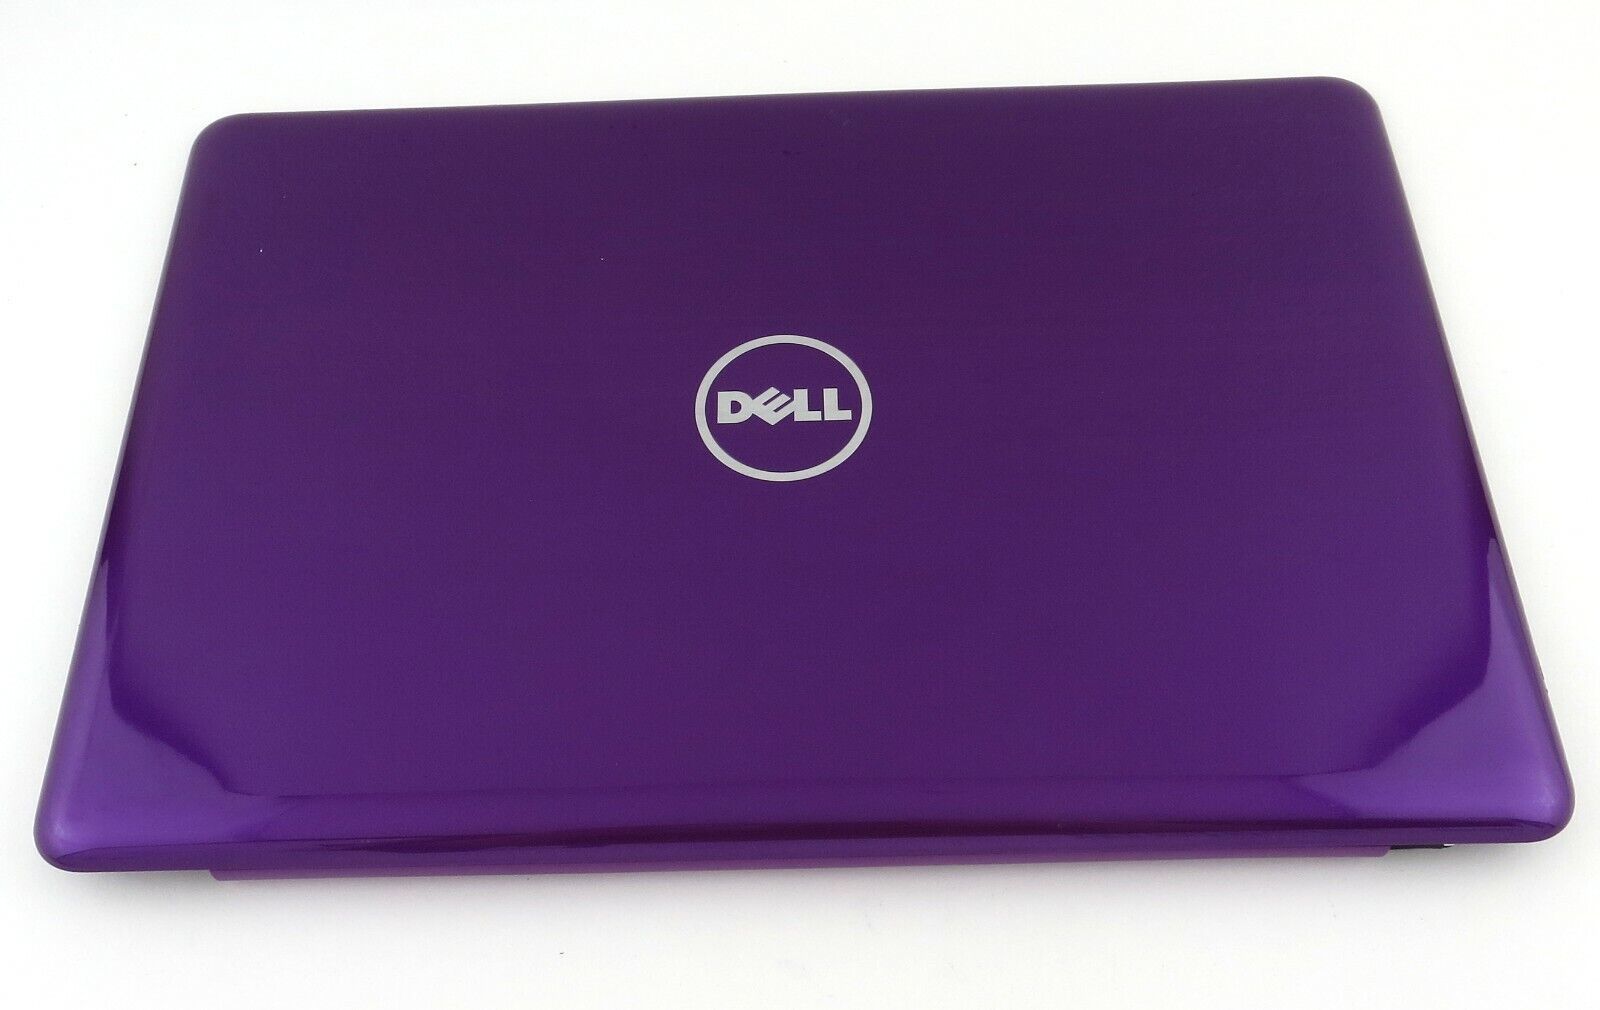 Primary image for Dell Inspiron 15 5565 / 5567 Purple Lcd Back Cover Lid - M95VW 0M95VW 511